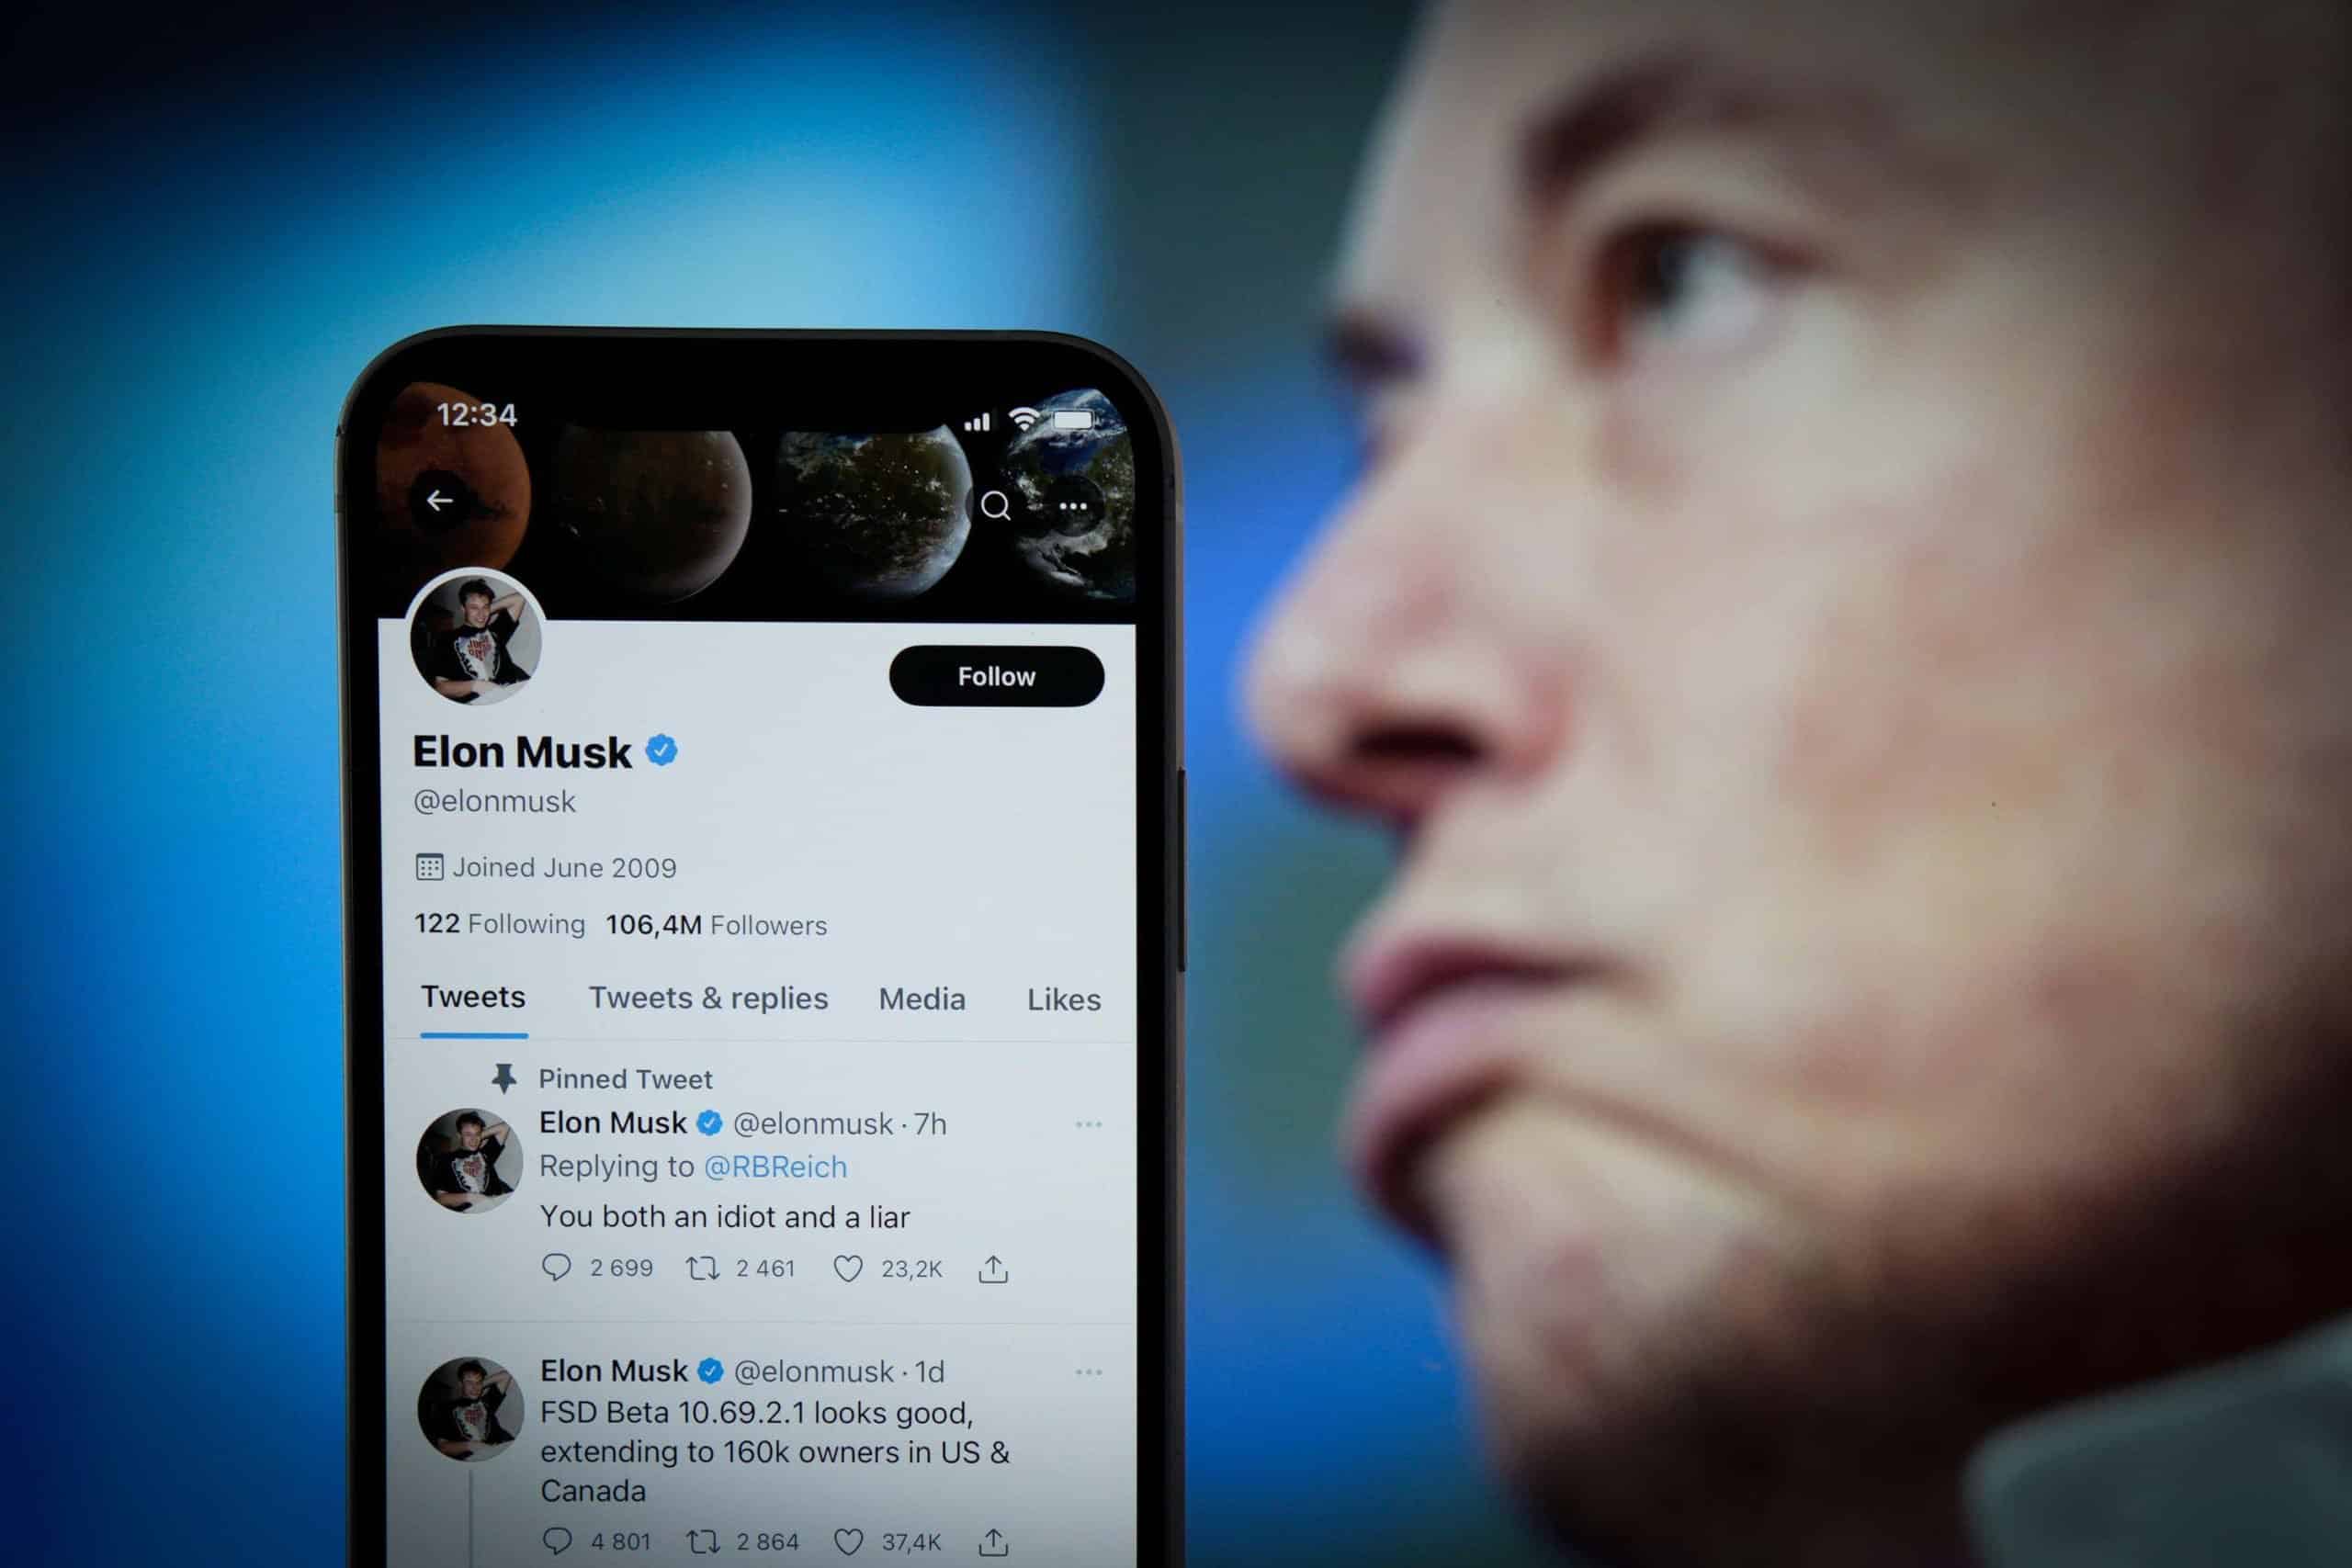 Twitter (X) may start charging new users to post, Elon Musk says